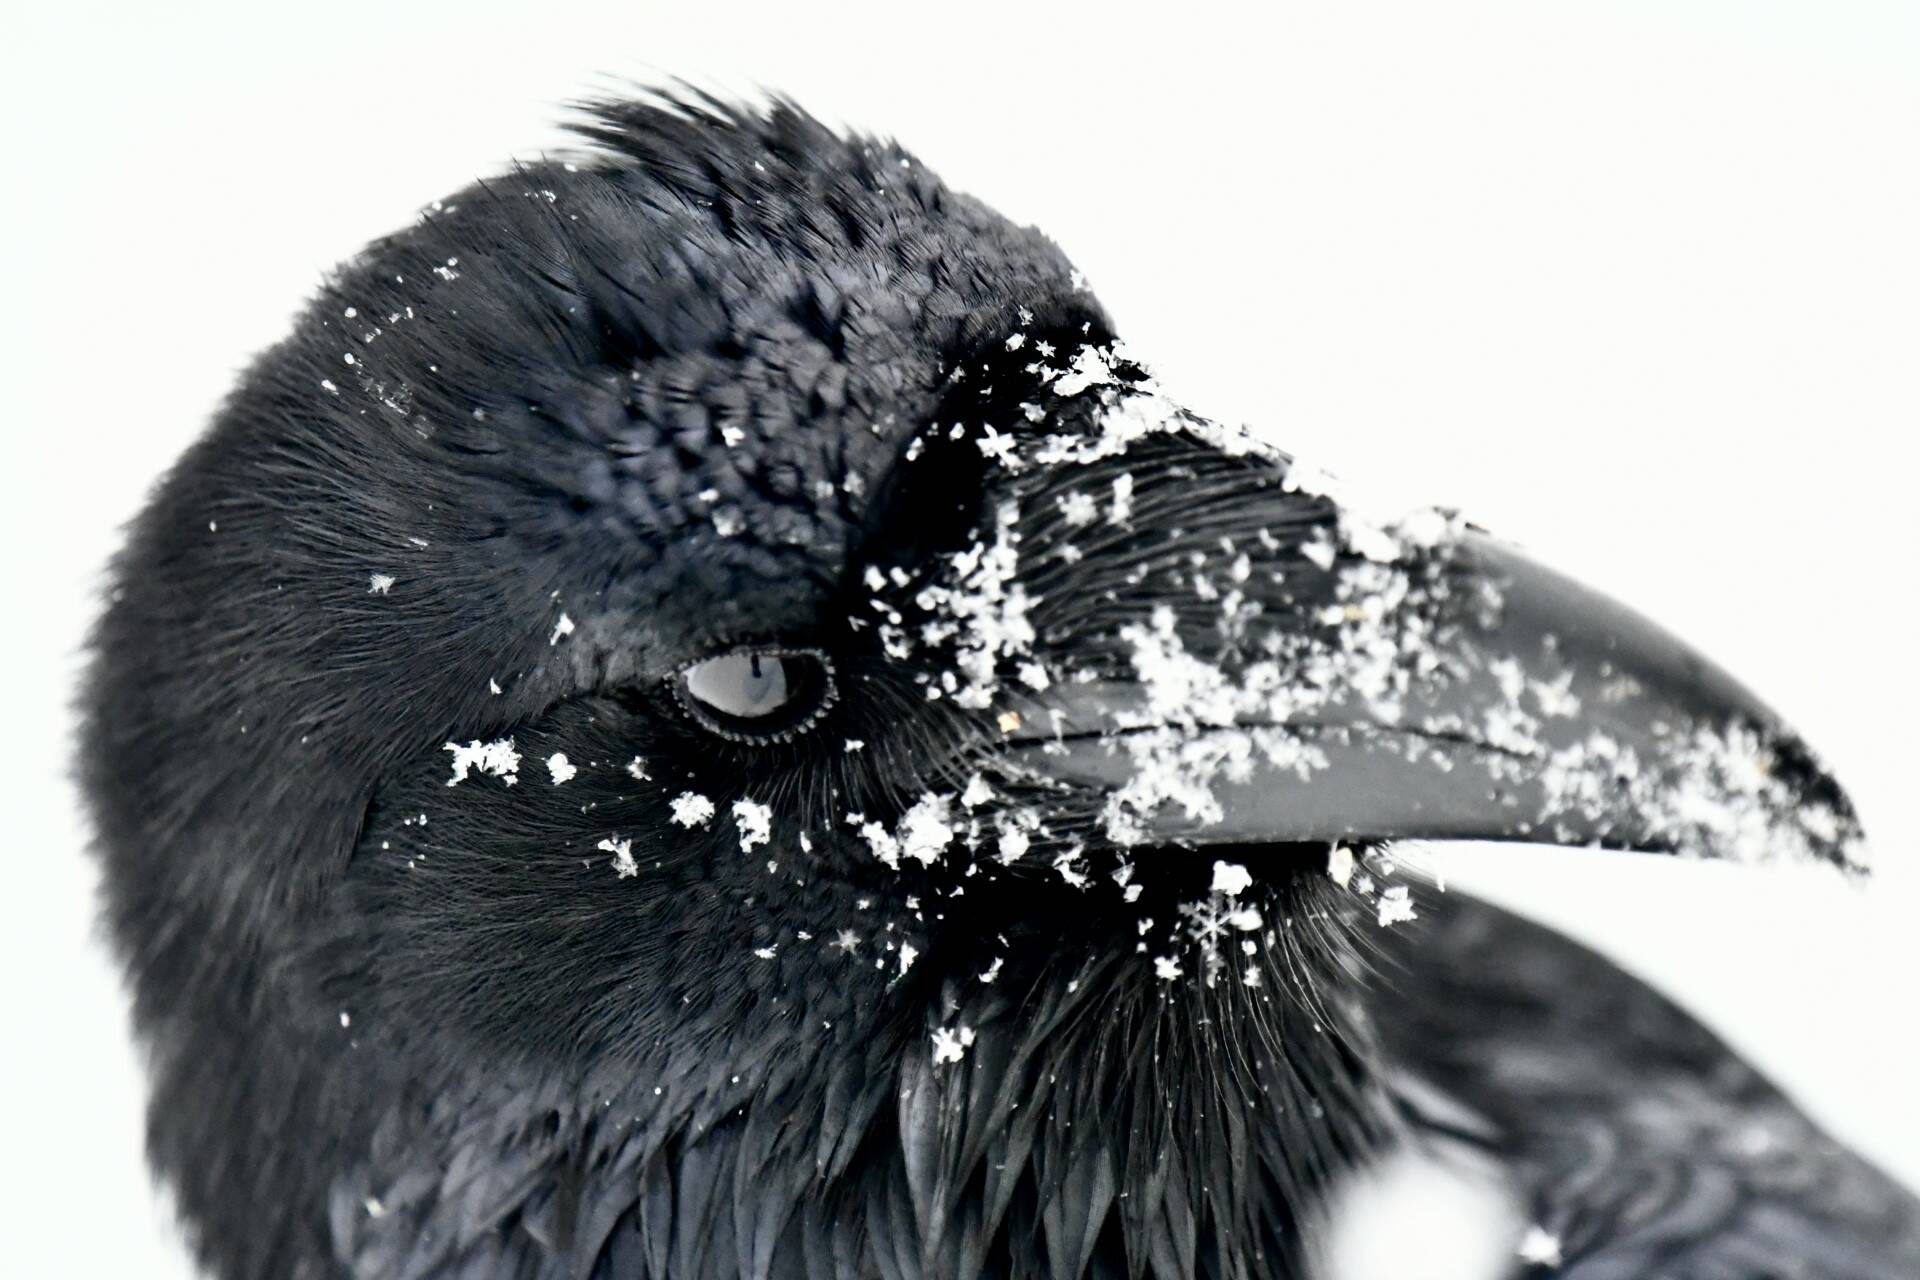 A raven at the docks downtown on Jan. 13. (Photo by Christopher Grau)